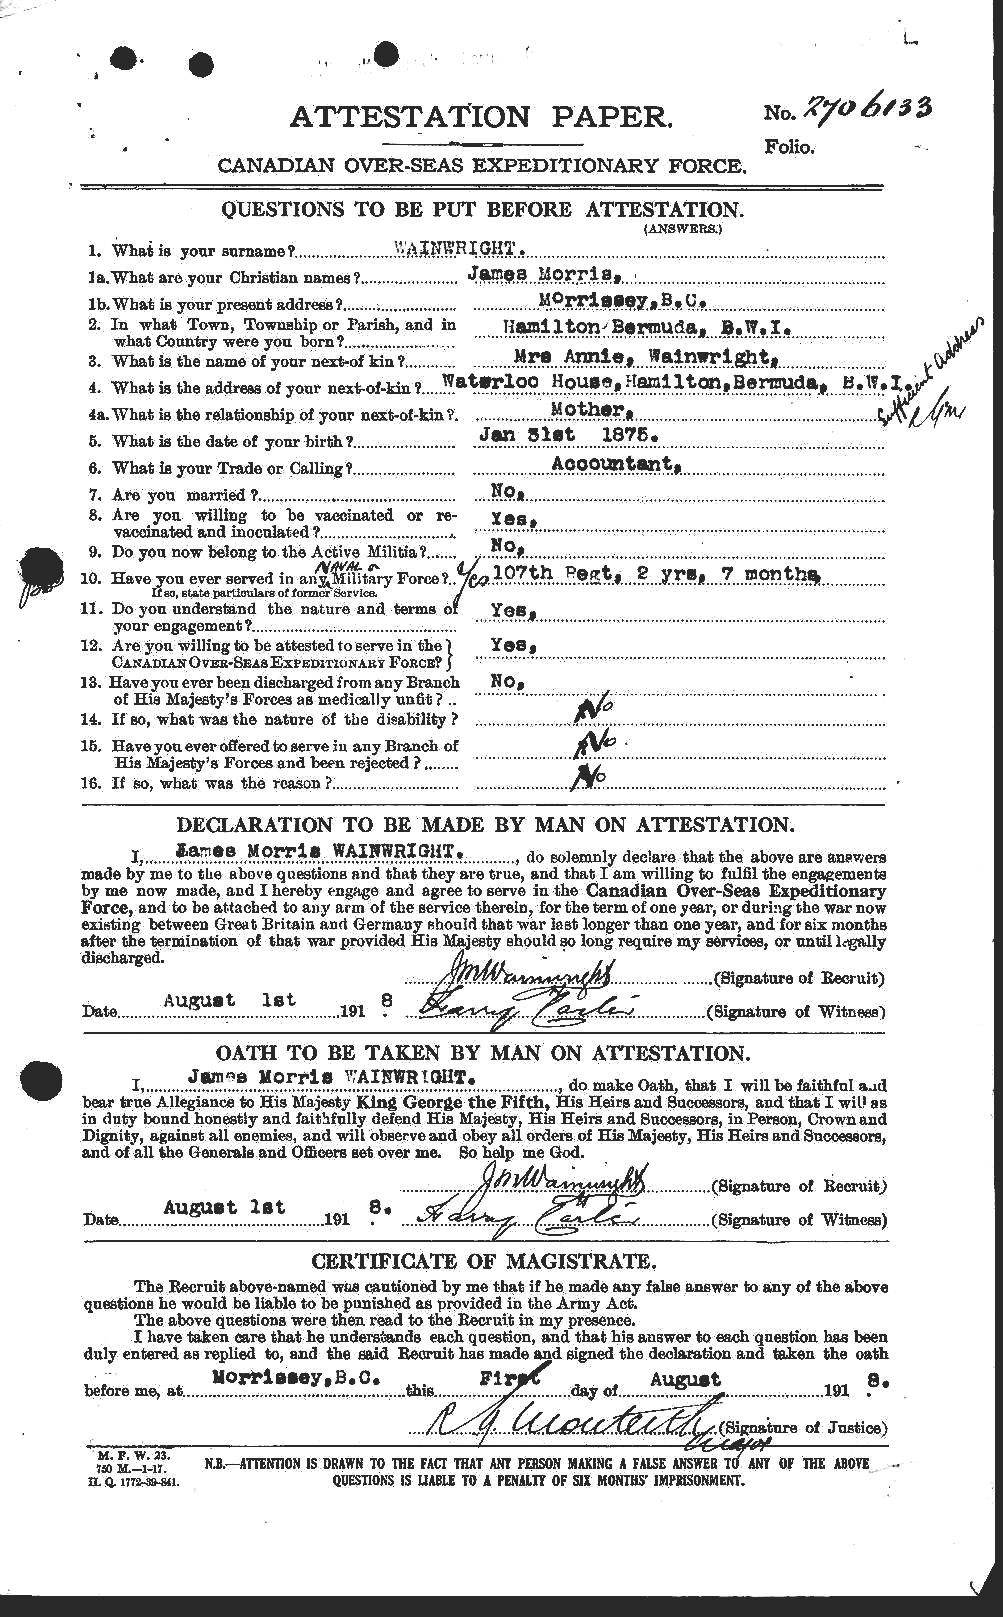 Personnel Records of the First World War - CEF 654186a